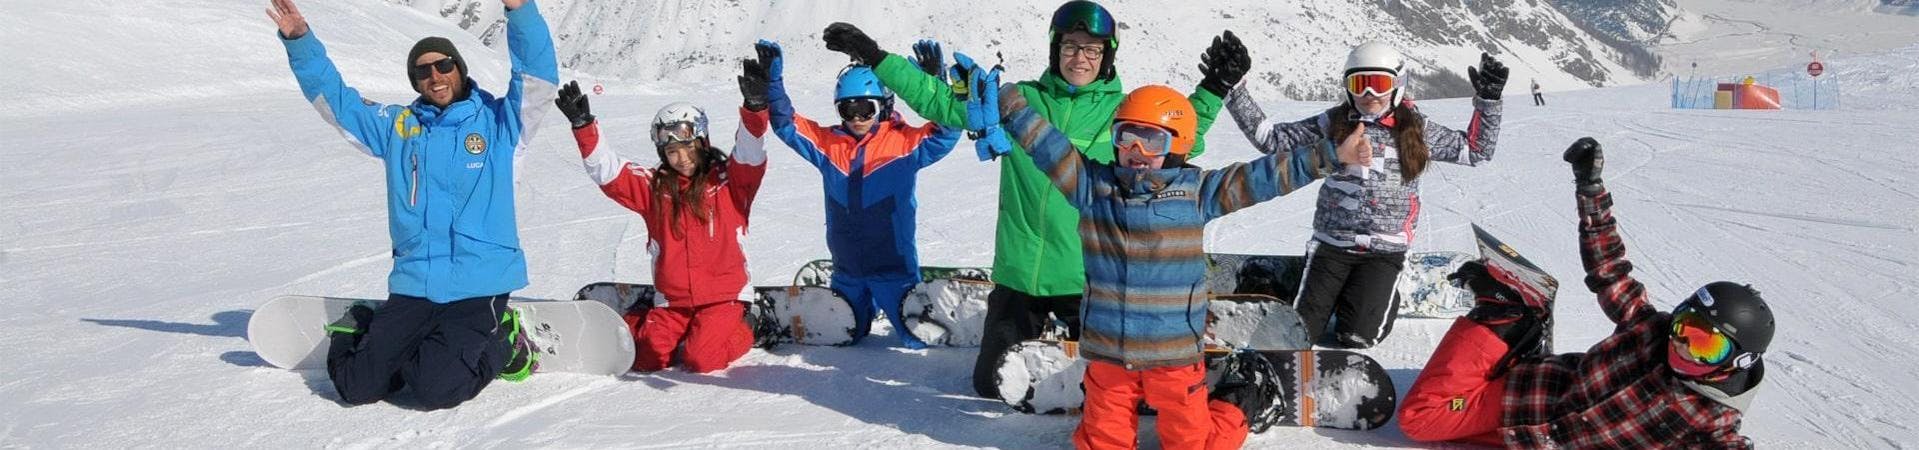 A group of kids is having fun in the snow alongside their snowbord instructor from the ski school Scuola di Sci Azzurra Livigno during their Snowboarding Lessons for Kids & Adults - All Levels.